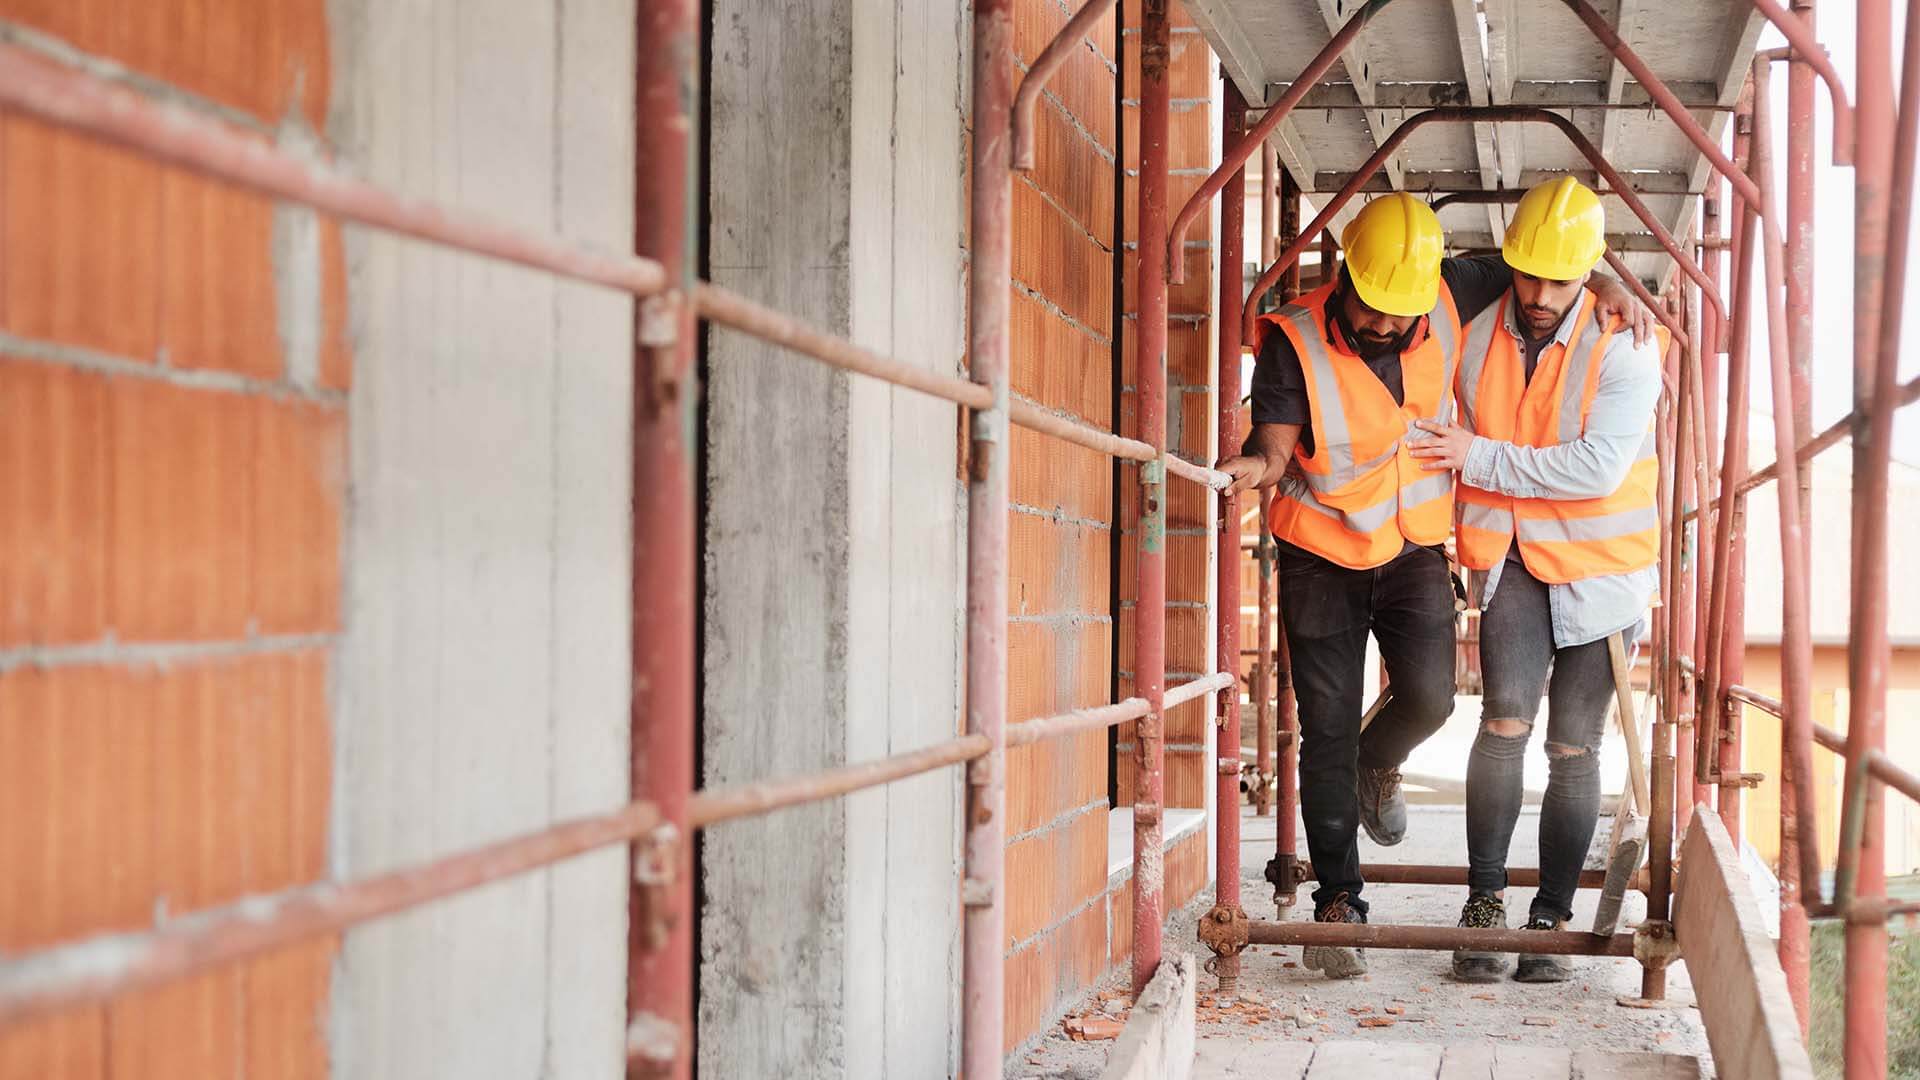 Construction worker injured on job being assisted by co-worker on their way to file a wokers' compensation claim with a personal injury attorney